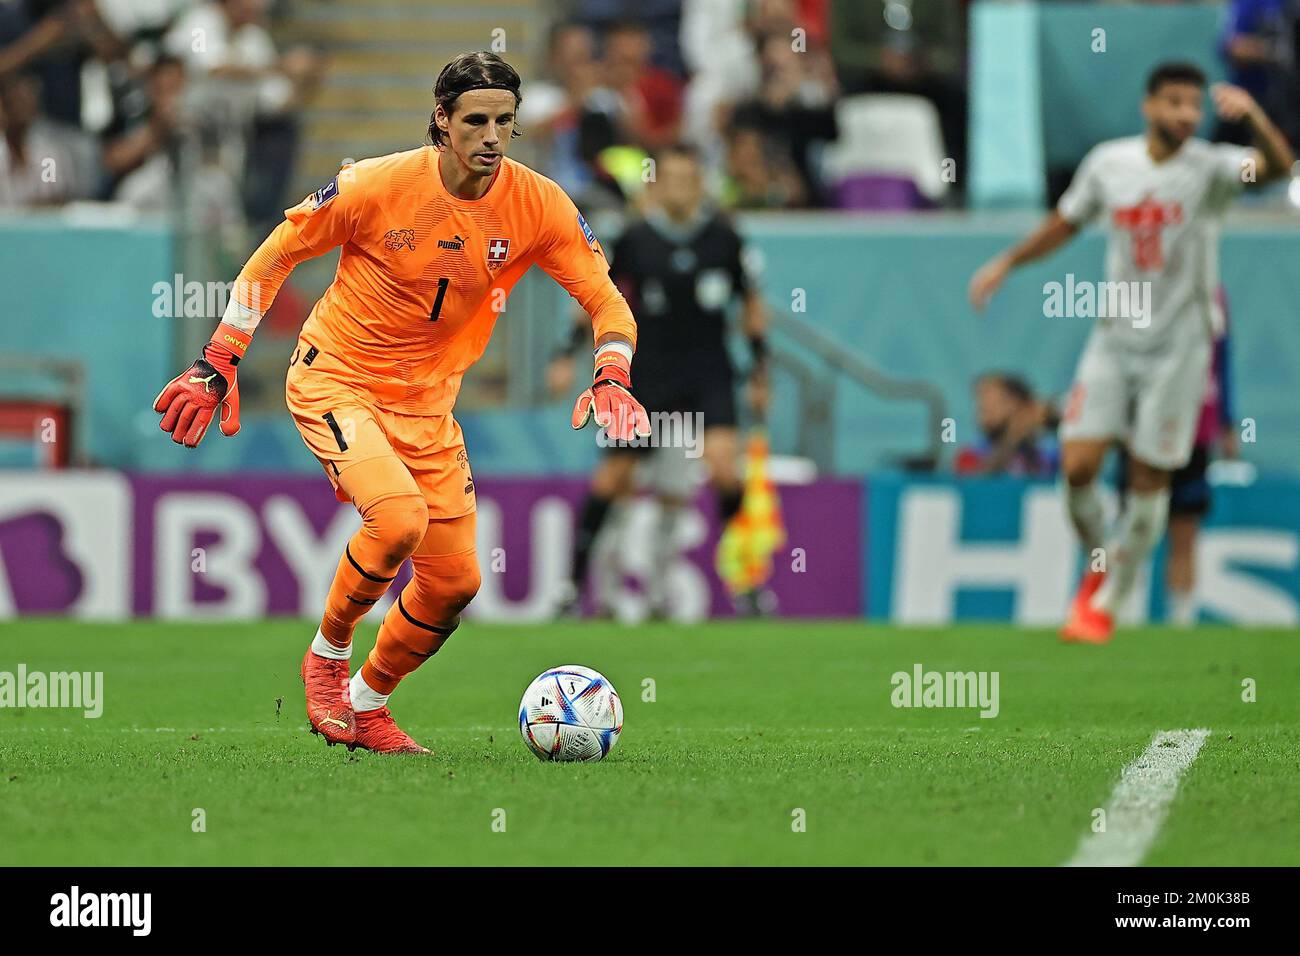 Doha, Qatar. 06th Dec, 2022. Yann Sommer of Switzerland, during the match between Portugal and Switzerland, for the Round of 16 of the FIFA World Cup Qatar 2022, at Lusail Stadium, this Tuesday 06. 30761 (Heuler Andrey/SPP) Credit: SPP Sport Press Photo. /Alamy Live News Stock Photo